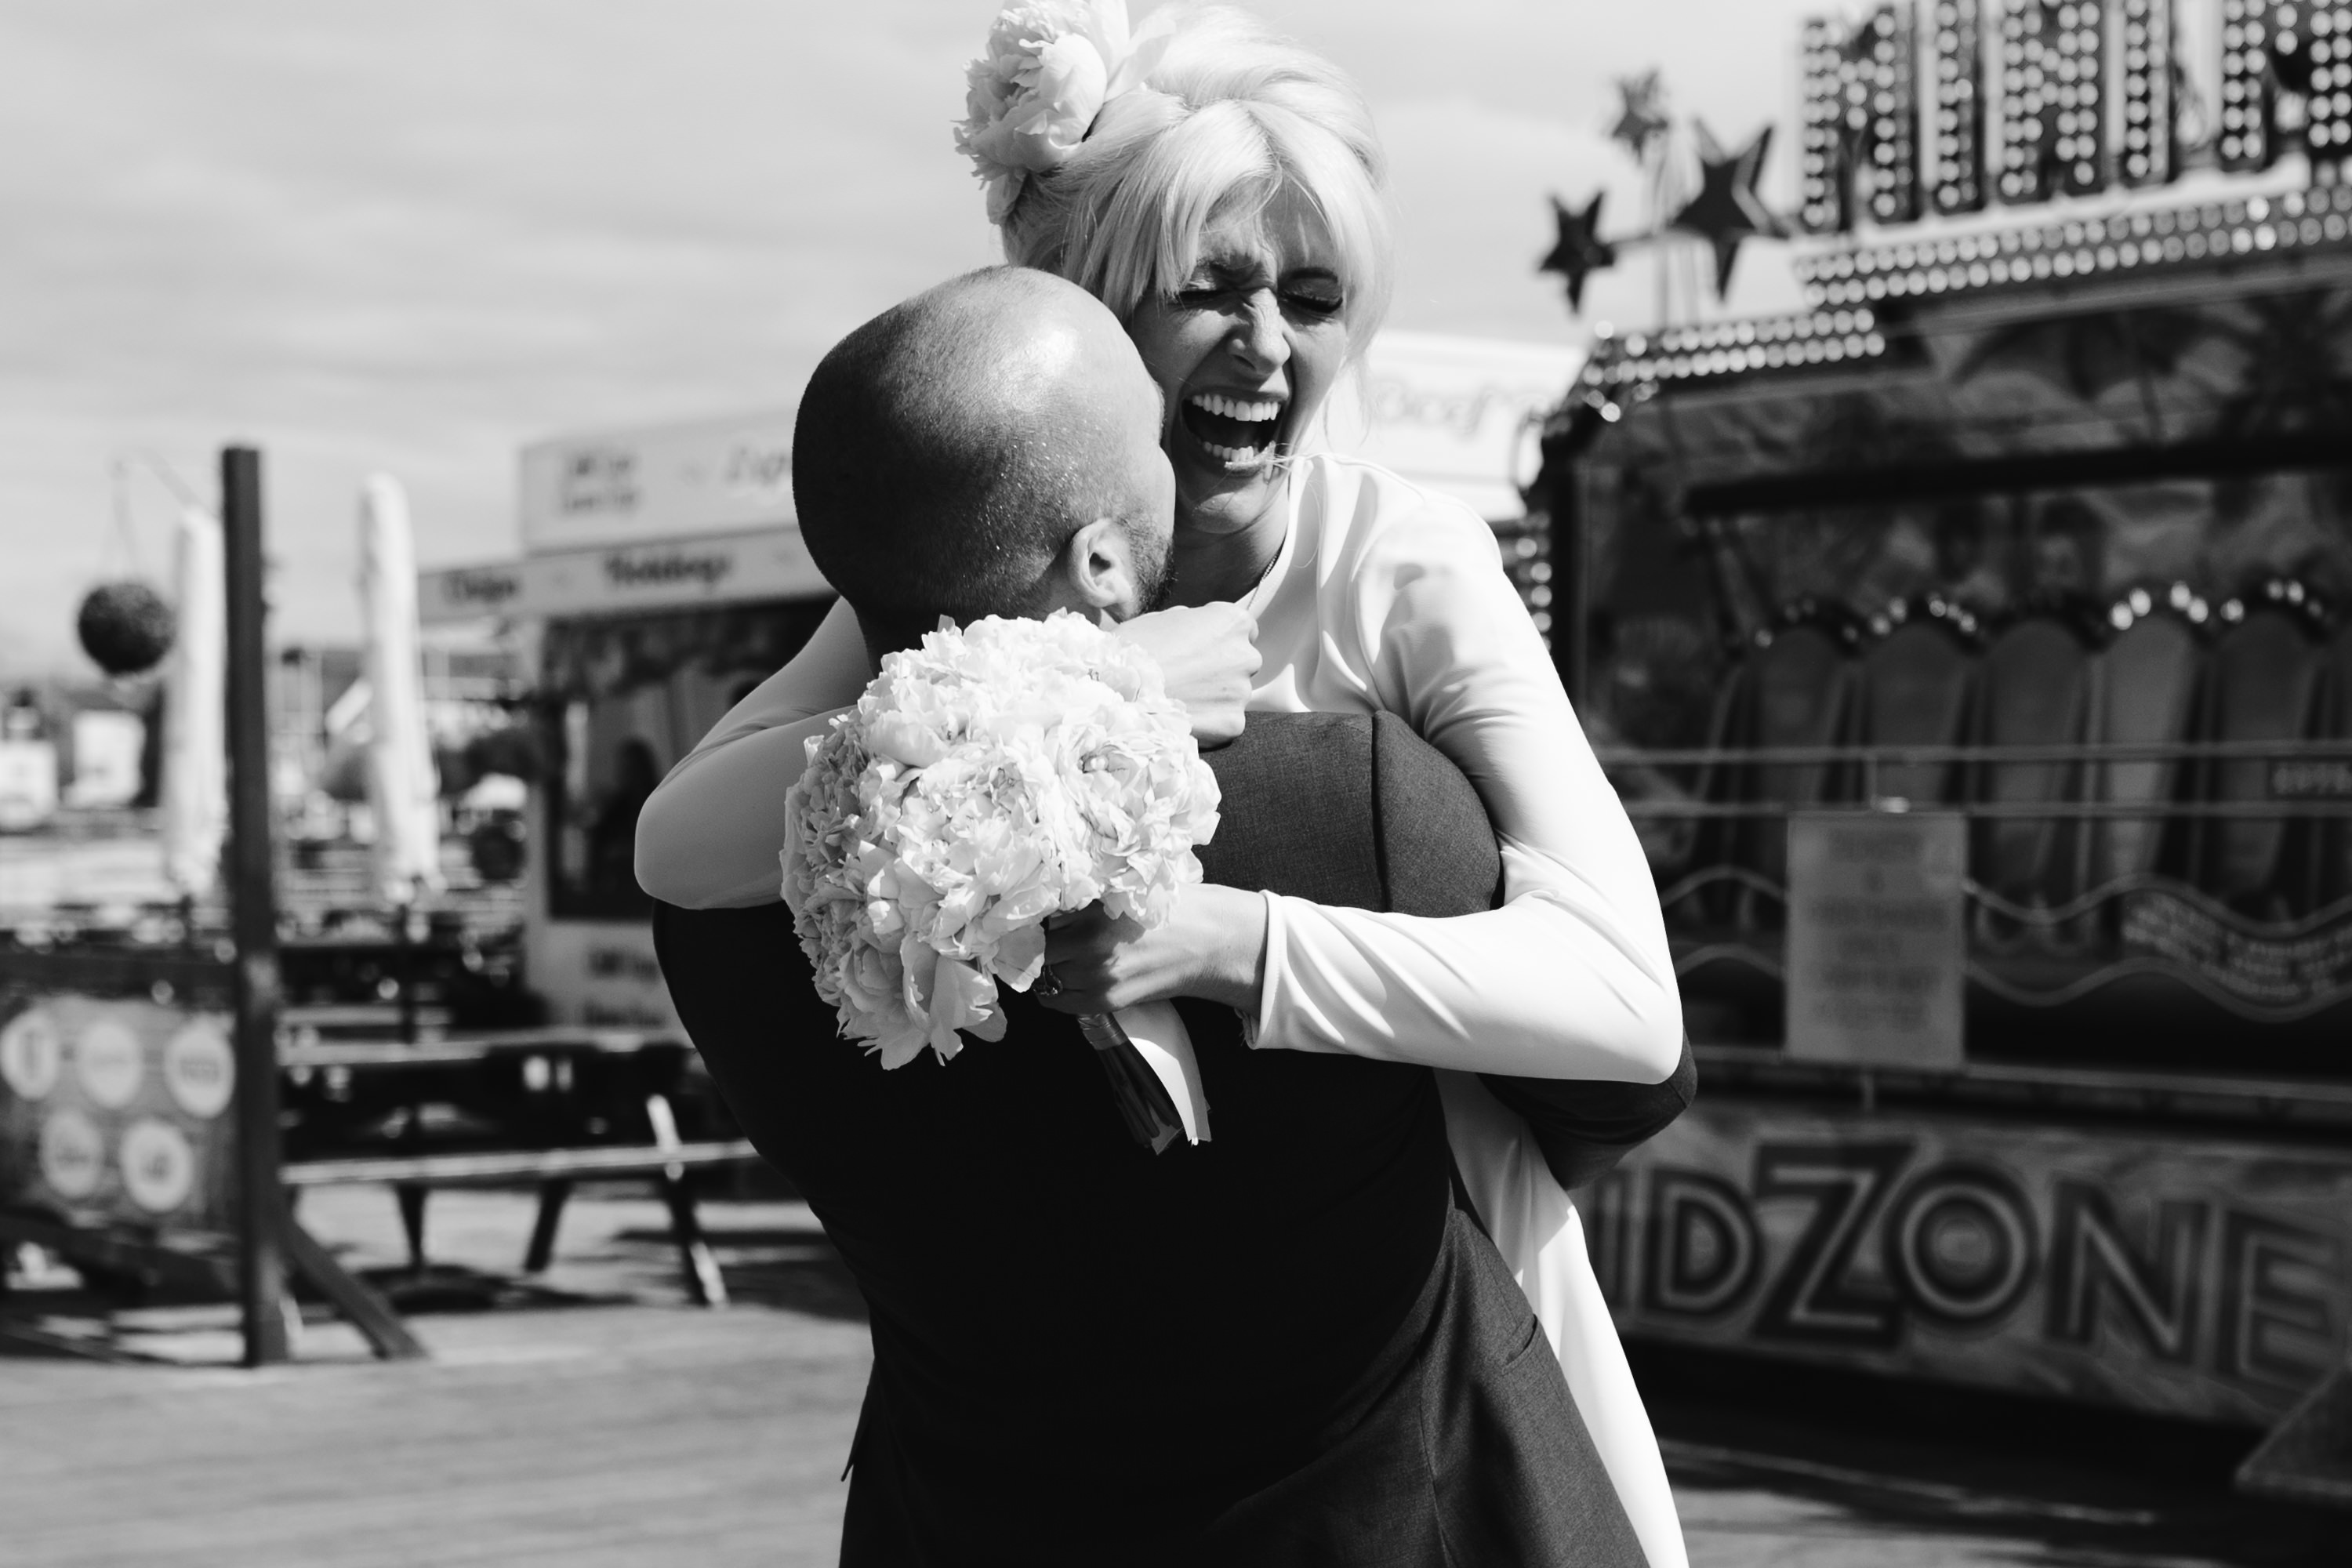 Dreamy Double Wedding - A Northern Blackpool Bash and An Inspirational Italian Extravaganza